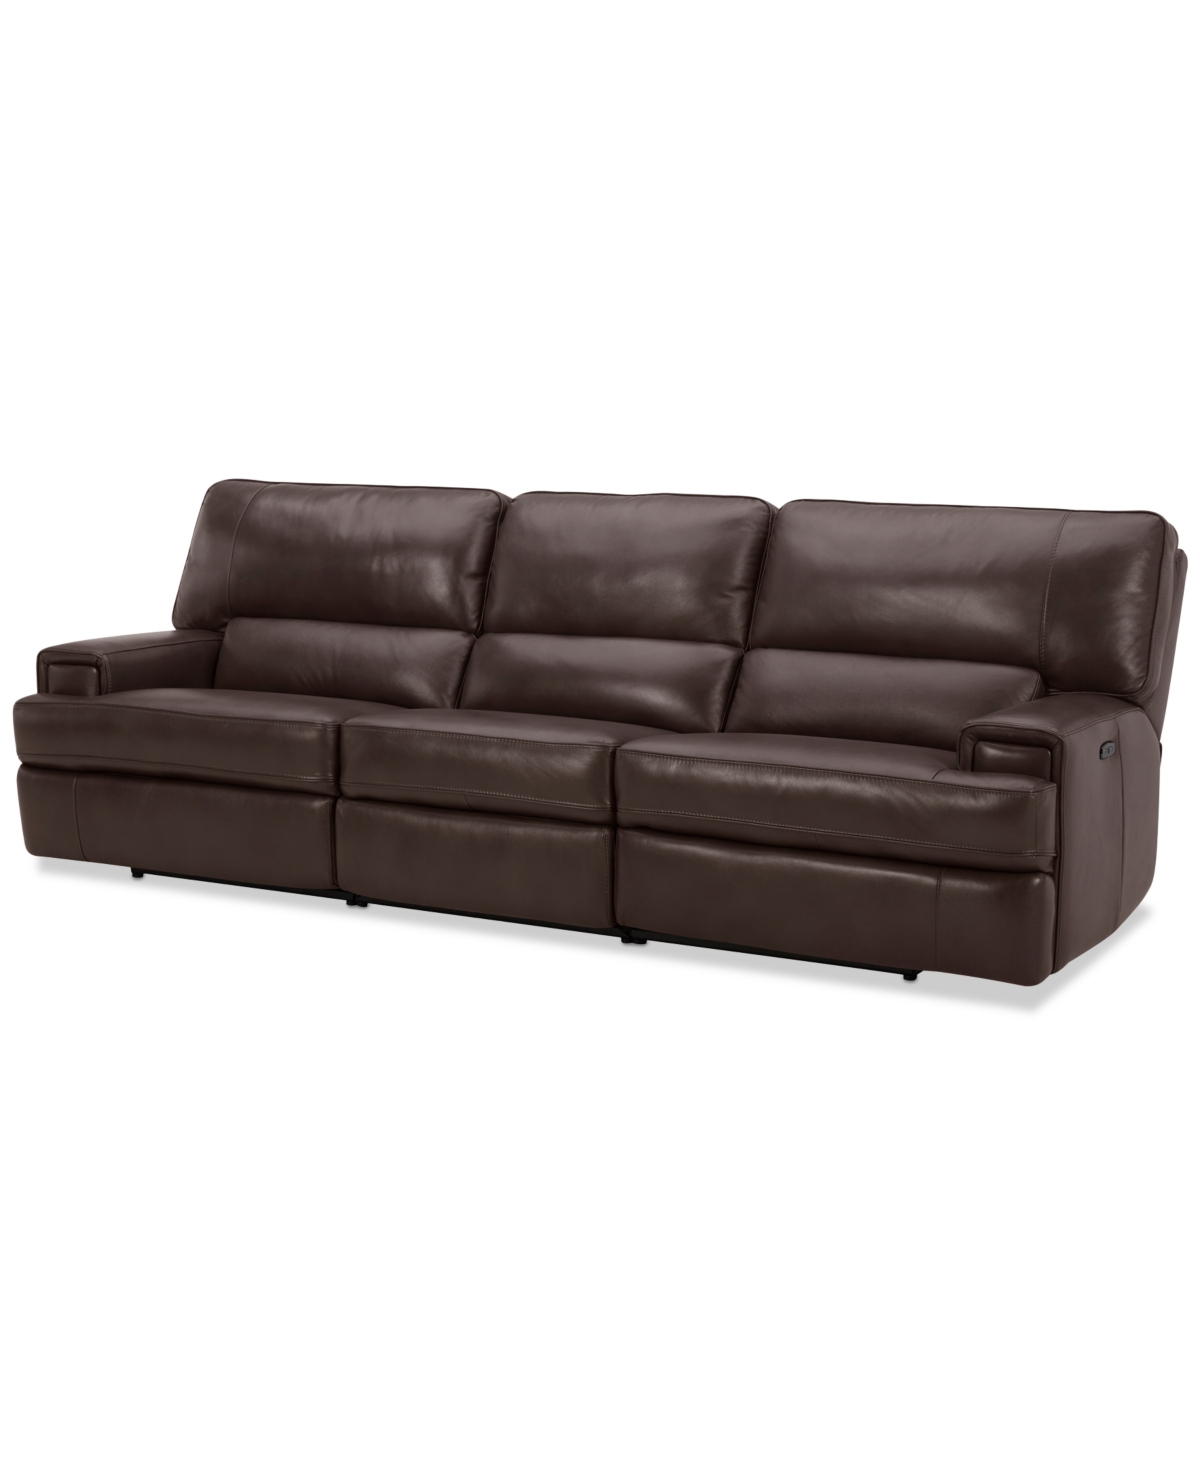 Furniture Binardo 118" 3 Pc Zero Gravity Leather Sectional With 3 Power Recliners, Created For Macy's In Walnut